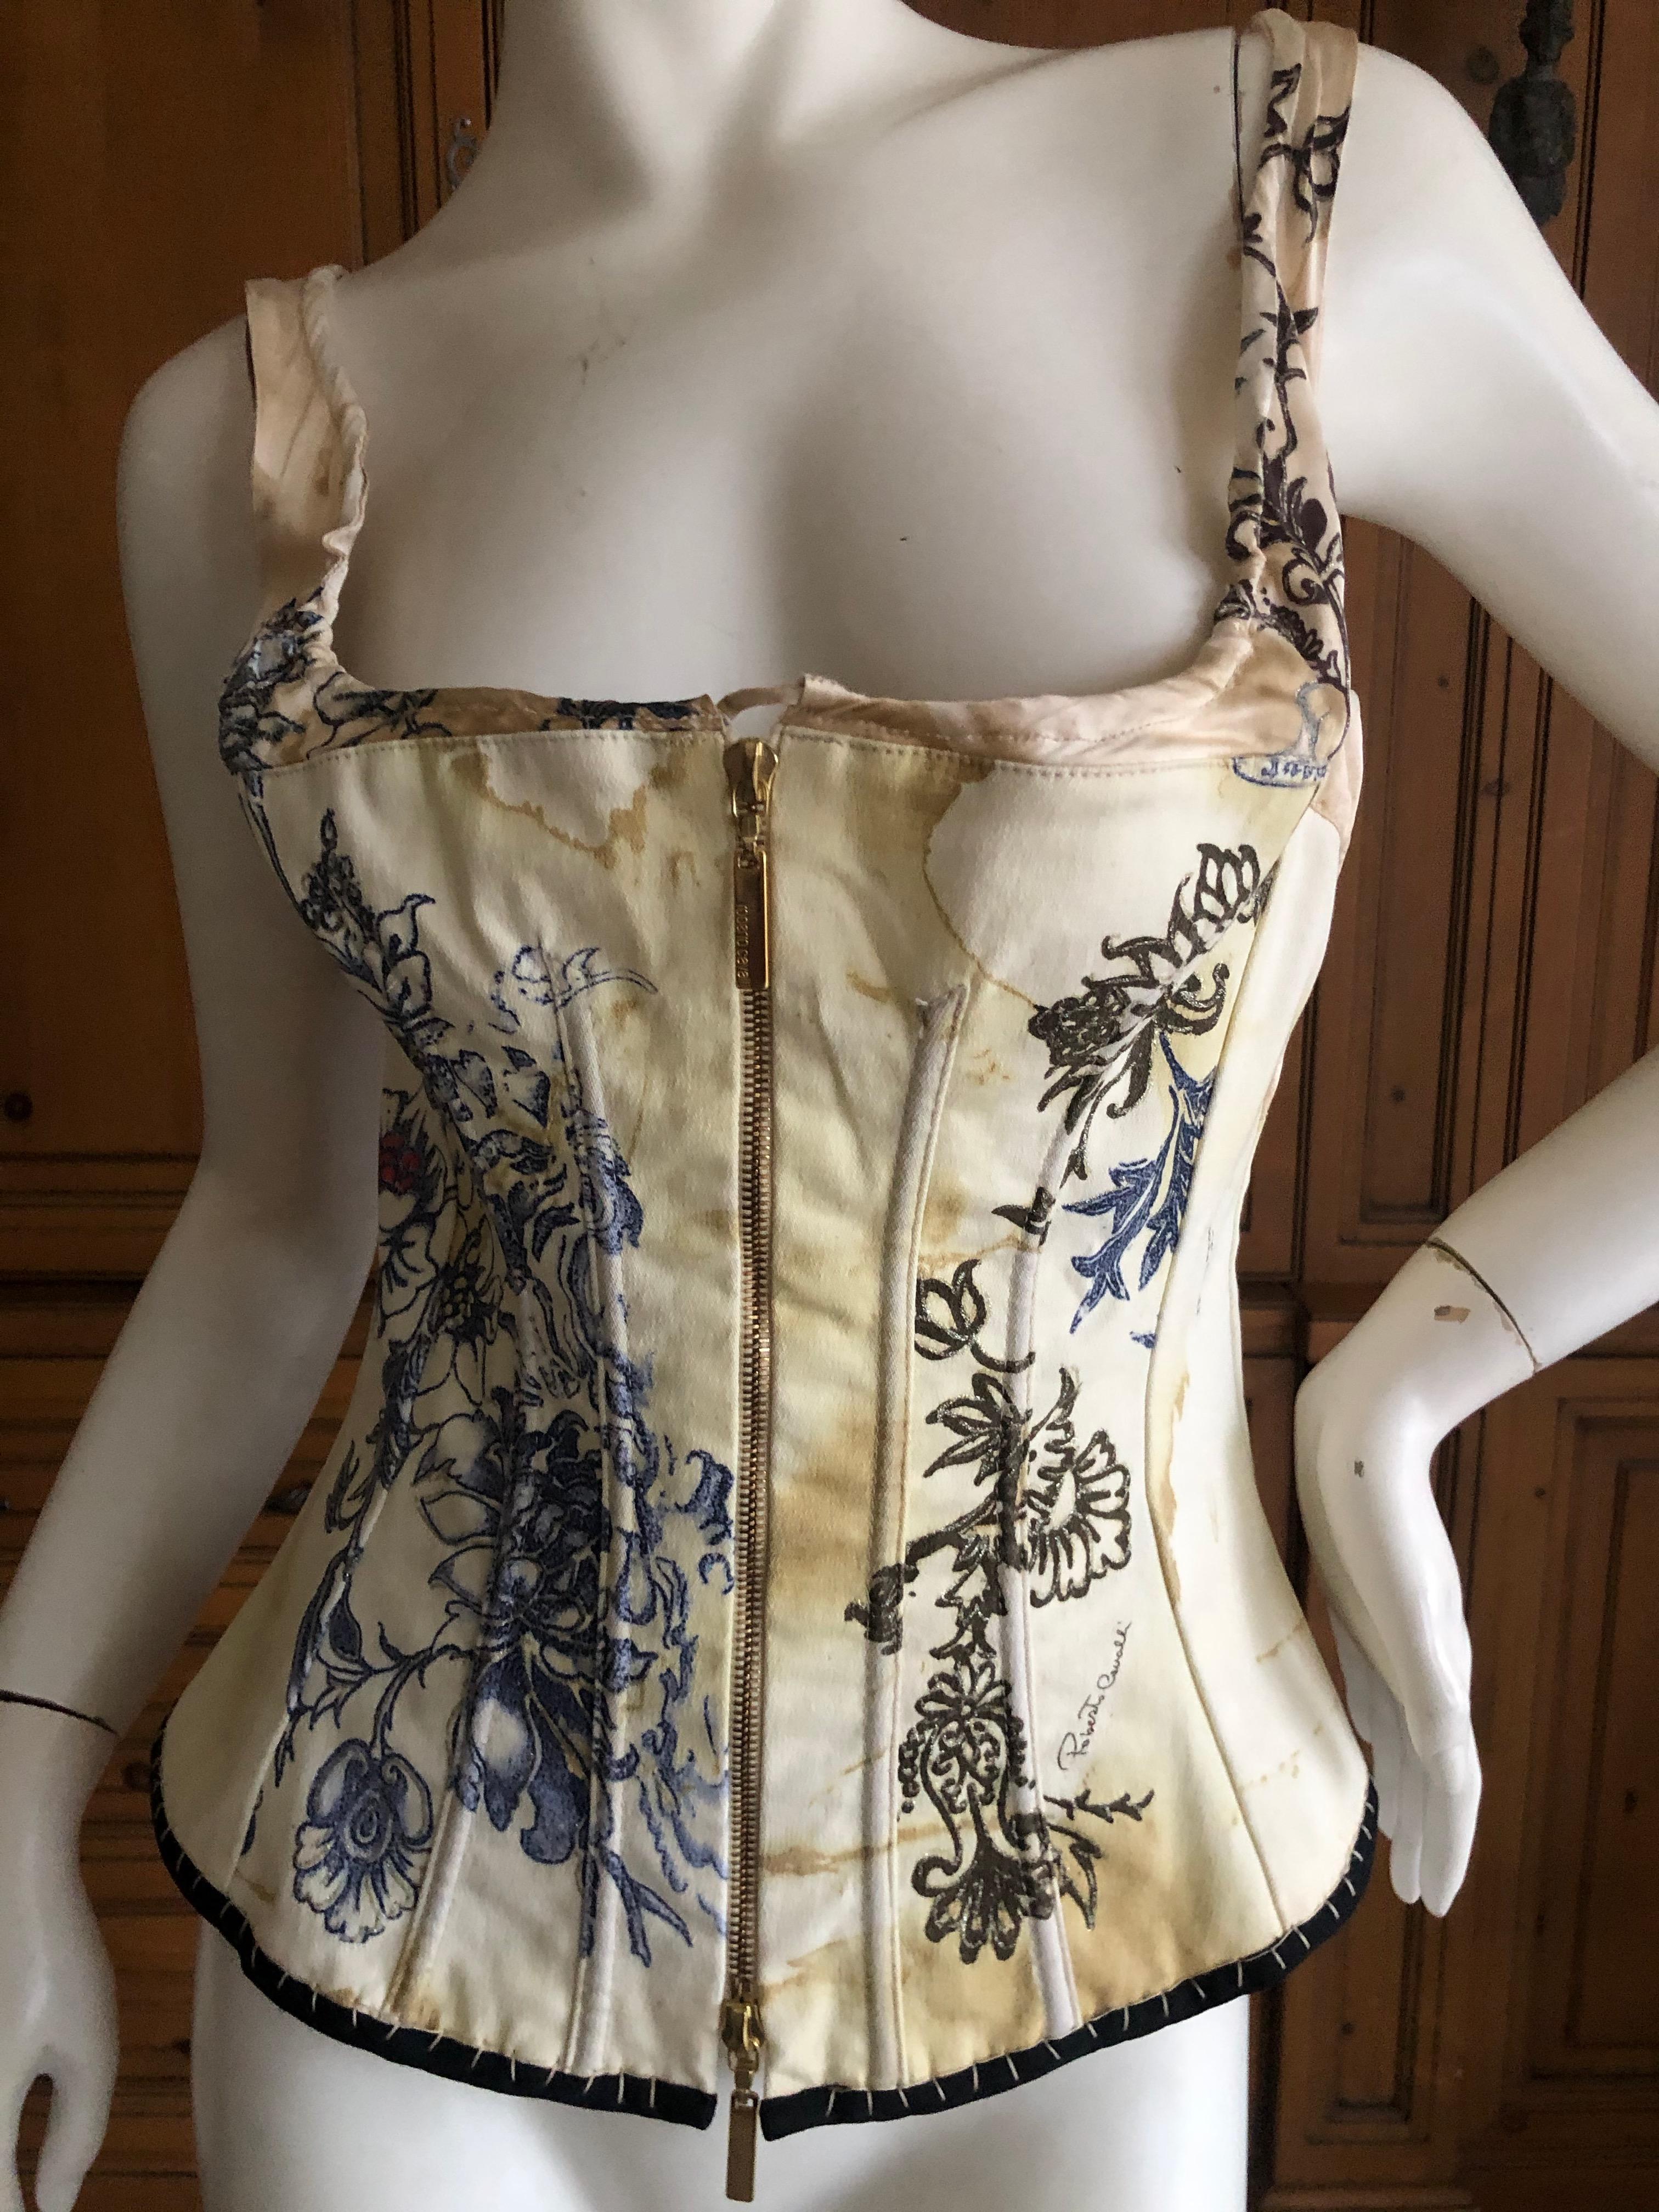 Roberto Cavalli Vintage Distressed Zip Front Corset Bustier .
It is intentionally distressed, and seems to have a very generous bust.
Size M
Bust 38